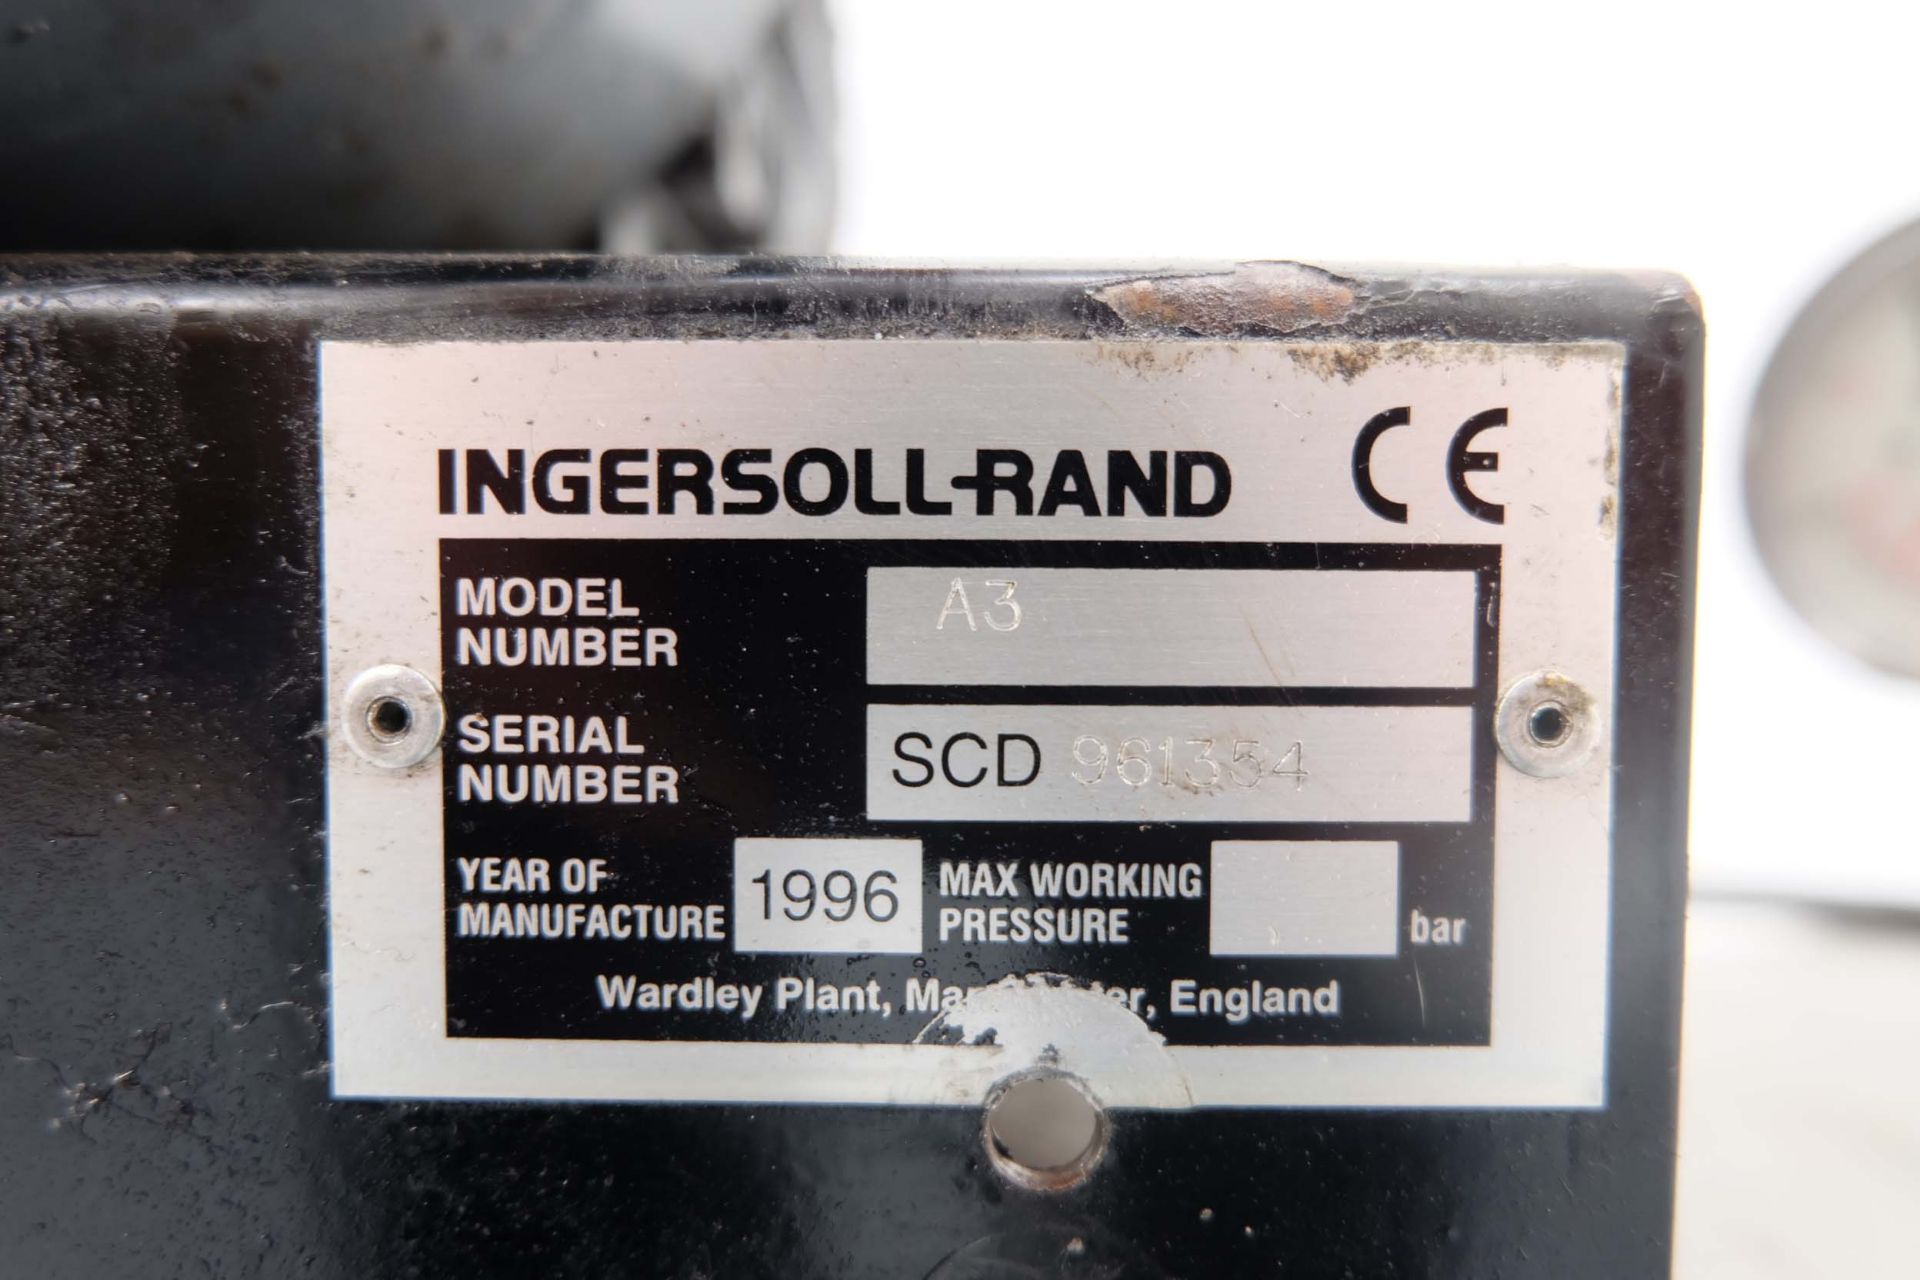 Ingersoll-Rand Model A3 Air Compressor. Power: 2.2 KW. 3 Phase. Max Pressure: 10 Bar. - Image 5 of 6